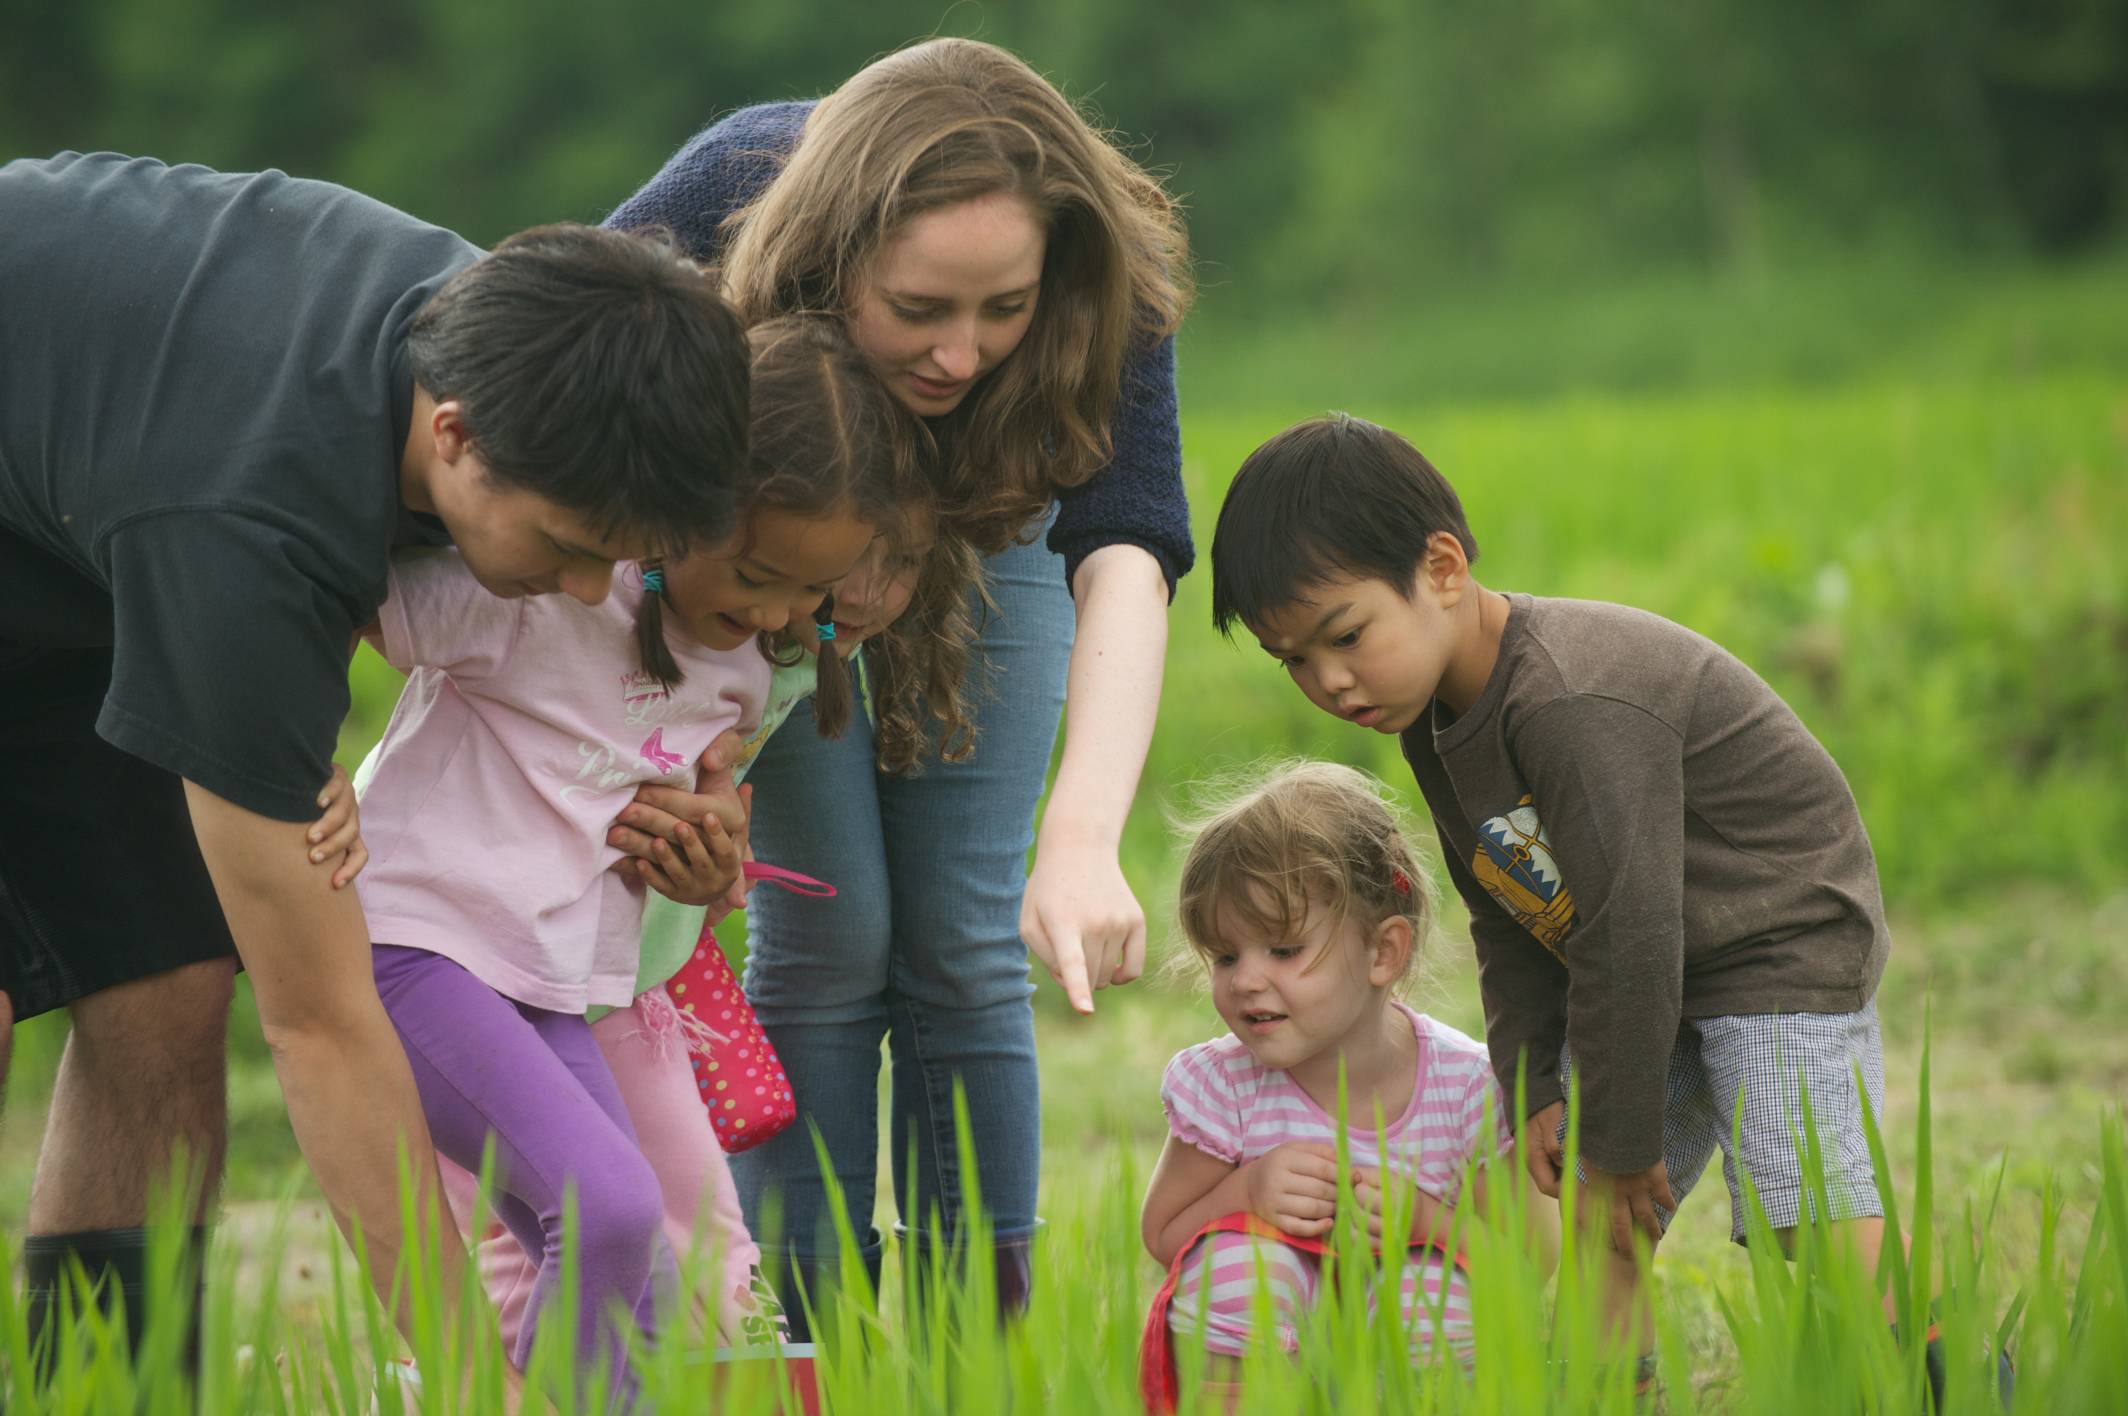 MnK’s EdVenture summer camps combine English learning and family fun in the Niseko countryside.